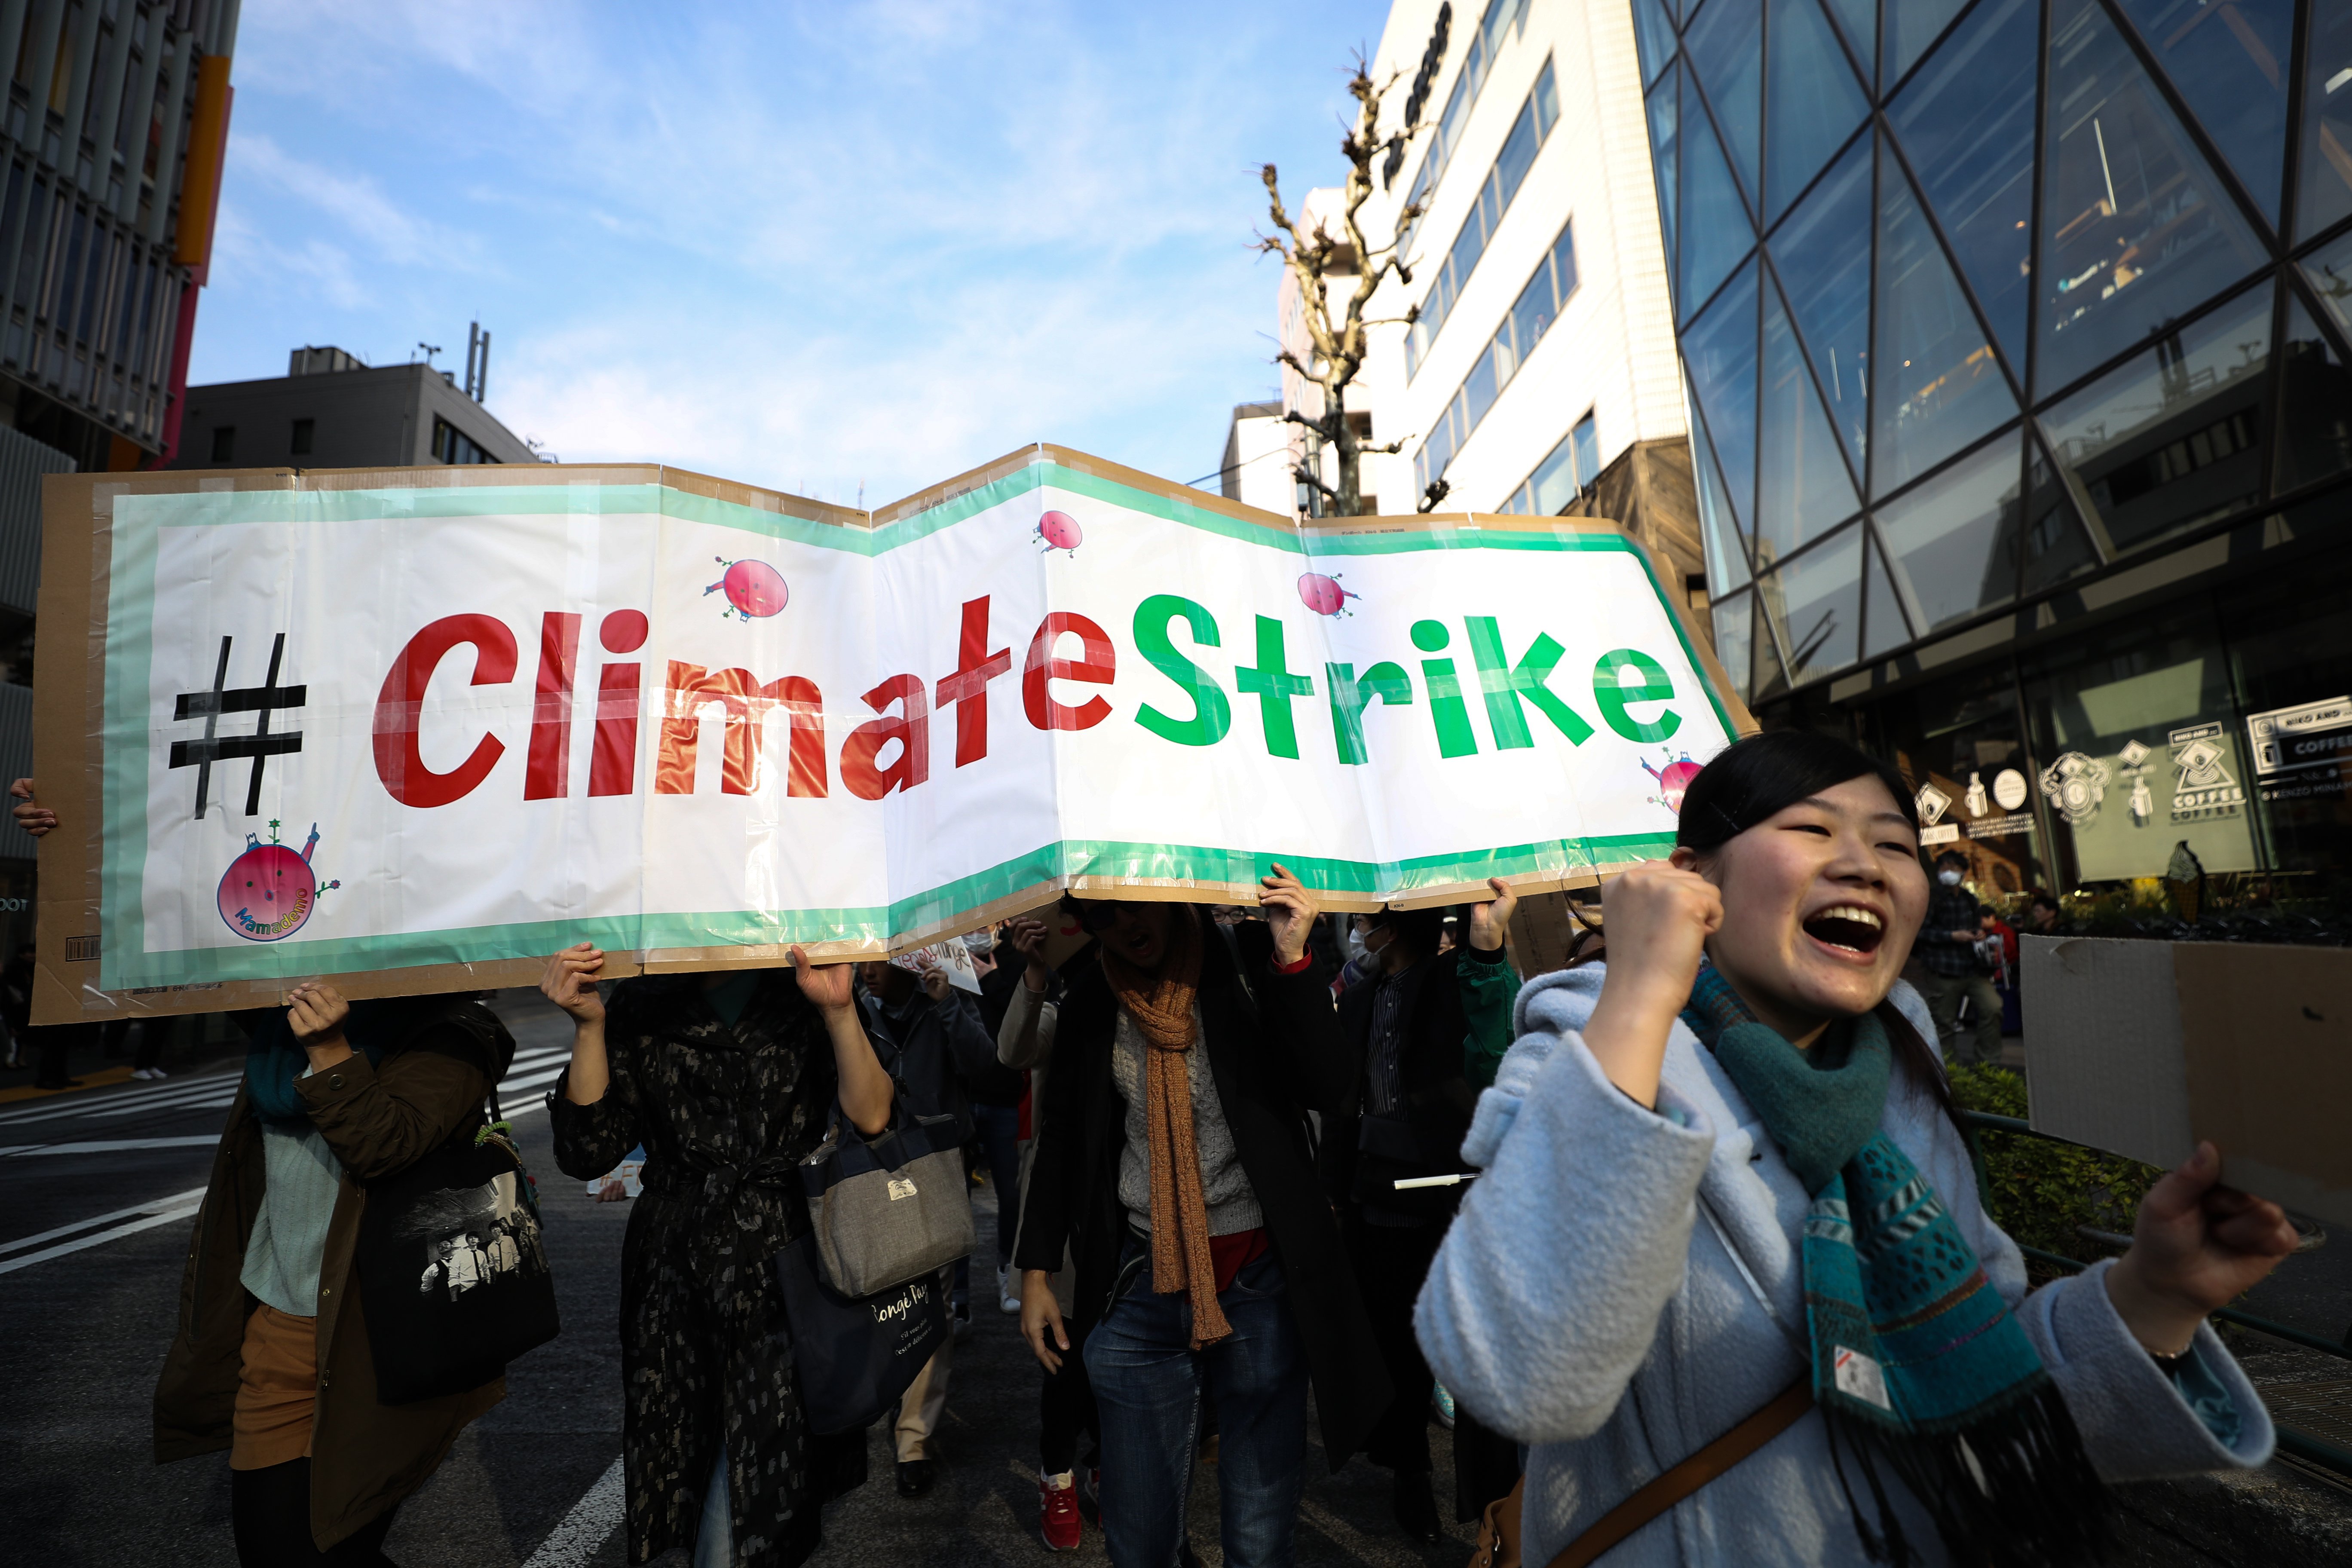 TOKYO, JAPAN - MARCH 15: Participants hold signs and shout slogans during the Fridays for Future march on March 15, 2019 in Tokyo, Japan. Students around the world took to the streets on March 15 to protest a lack of climate awareness and demand that elected officials take action on climate change. Inspired by Greta Thunberg, the 16-year-old environmental activist who started skipping school since August 2018 to protest outside Sweden's parliament, school and university students worldwide have followed her lead and shared her alarm and anger. Takashi Aoyama/Getty Images